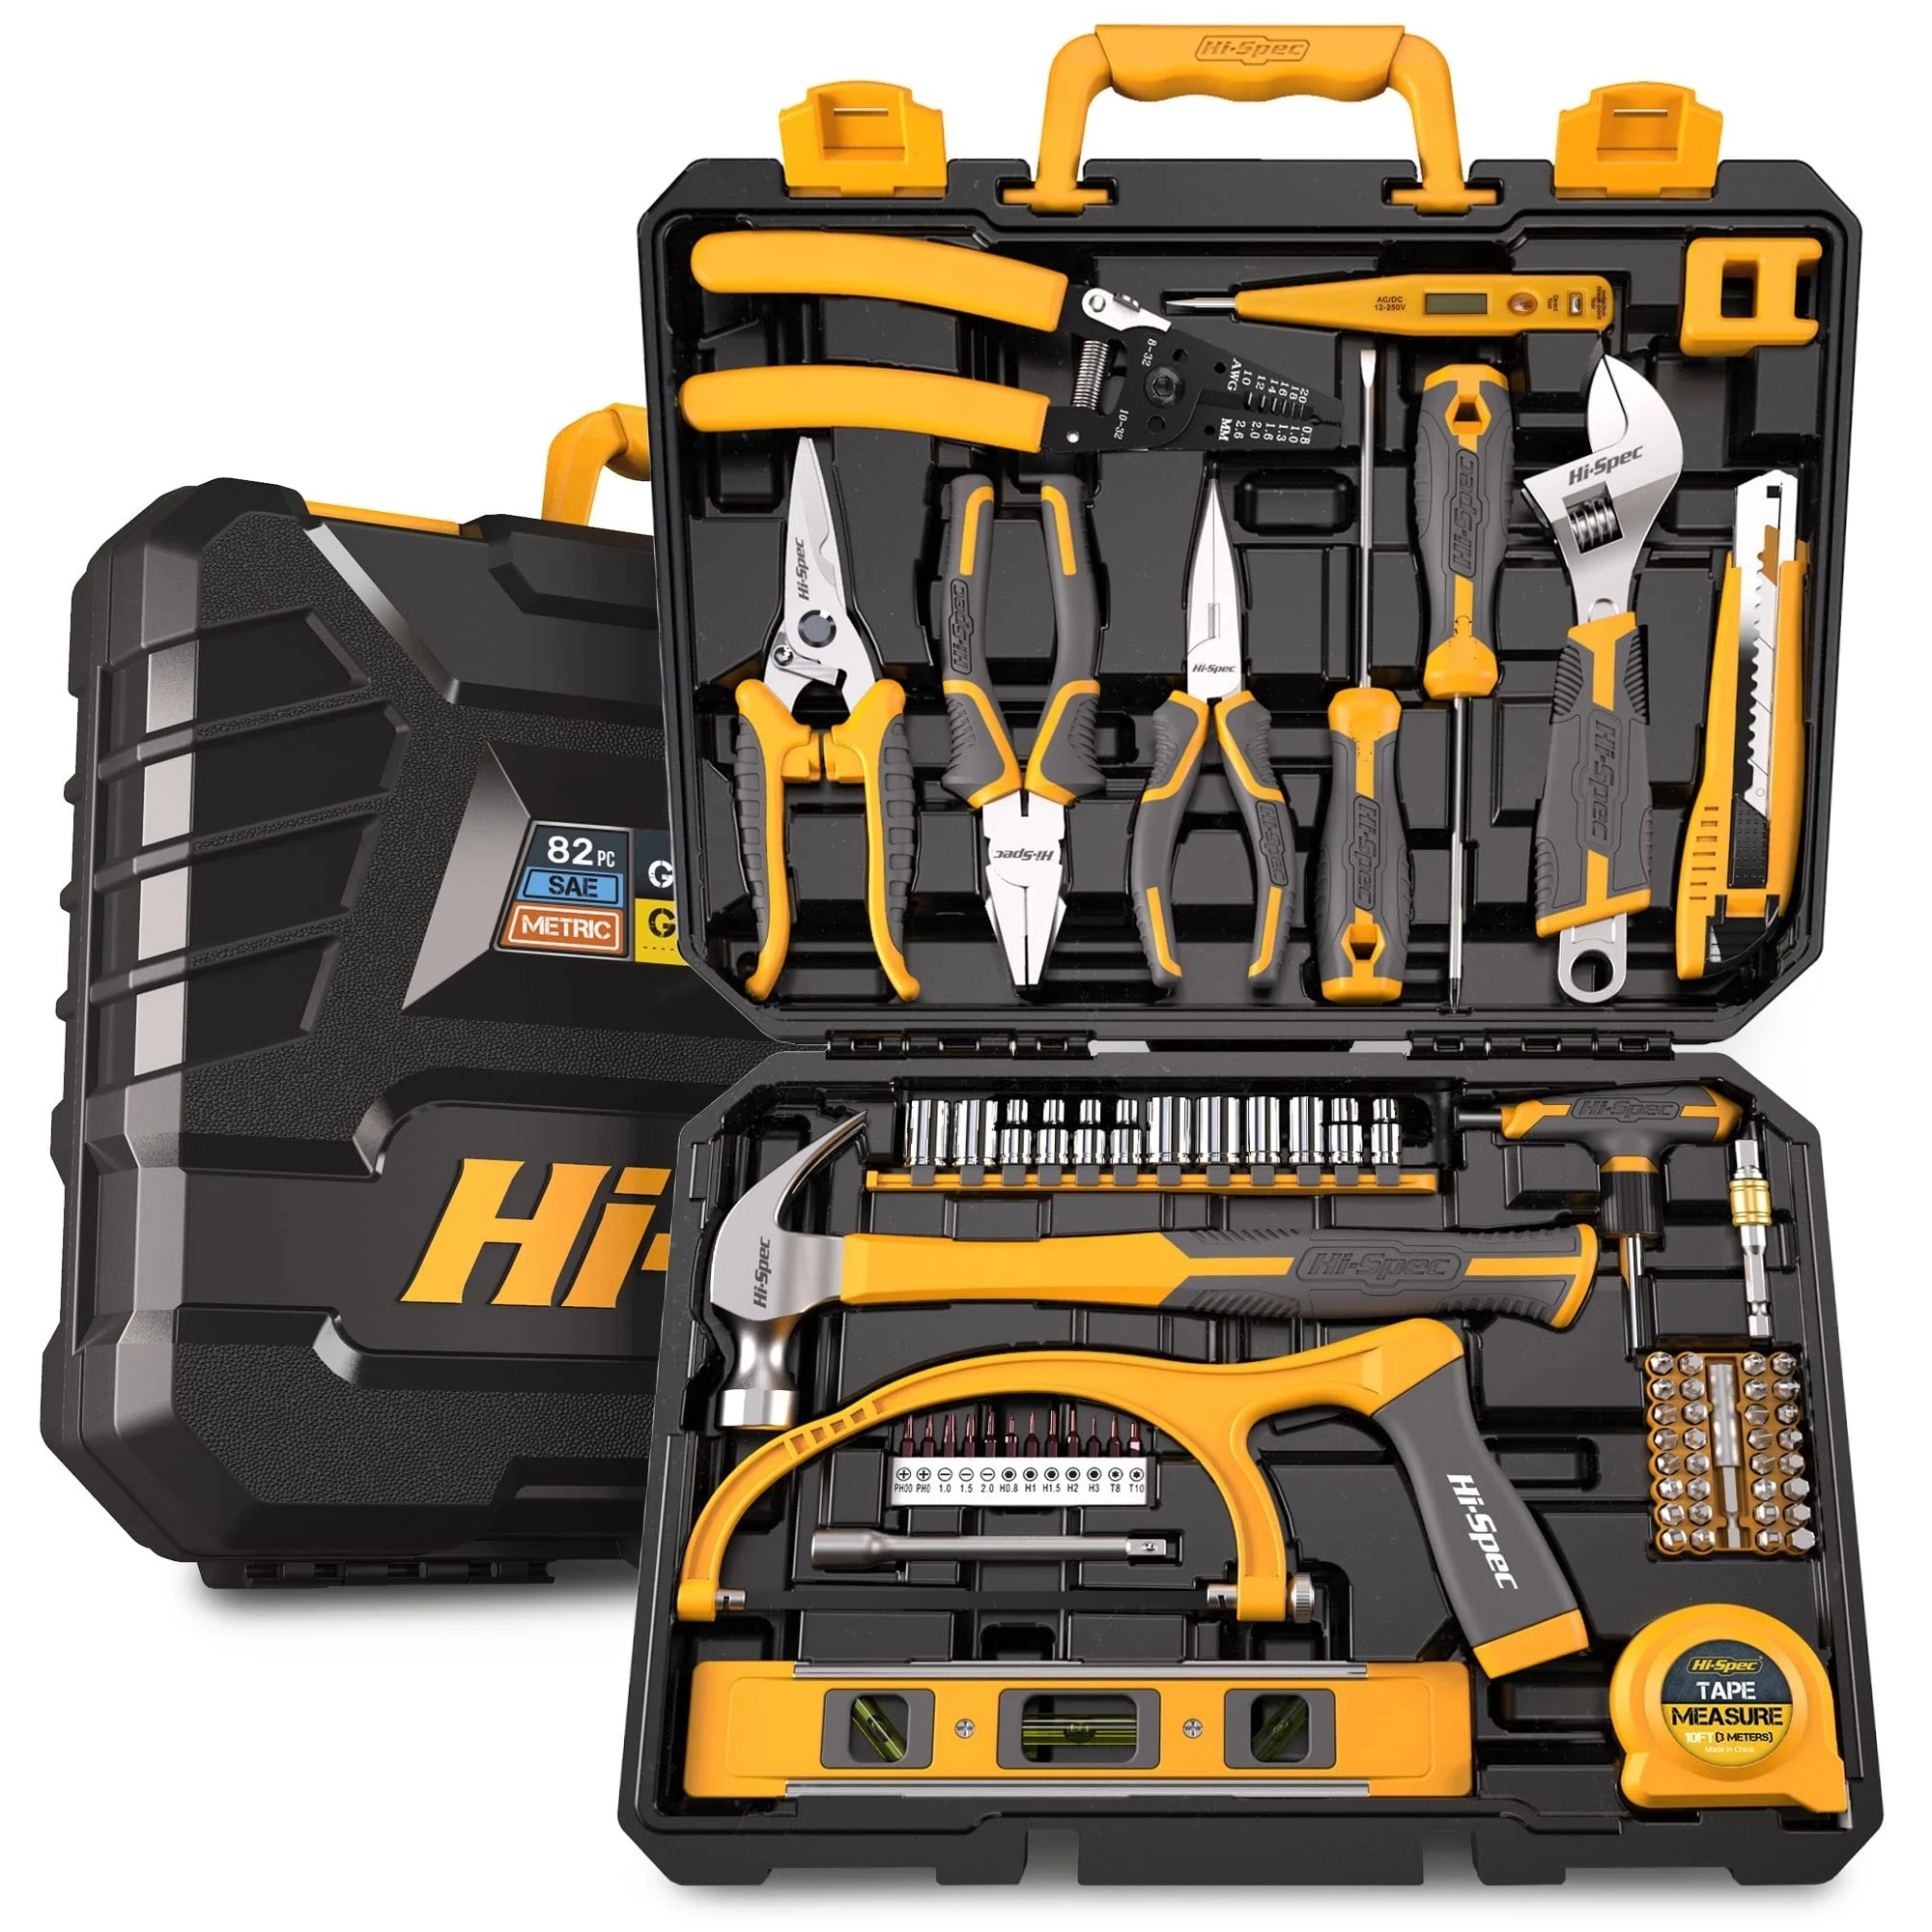 

2023 New 82piece Home & Garage Mechanics Tool Kit Set. Complete Essential Hand Tools for DIY Repairs Metal Wall Plate